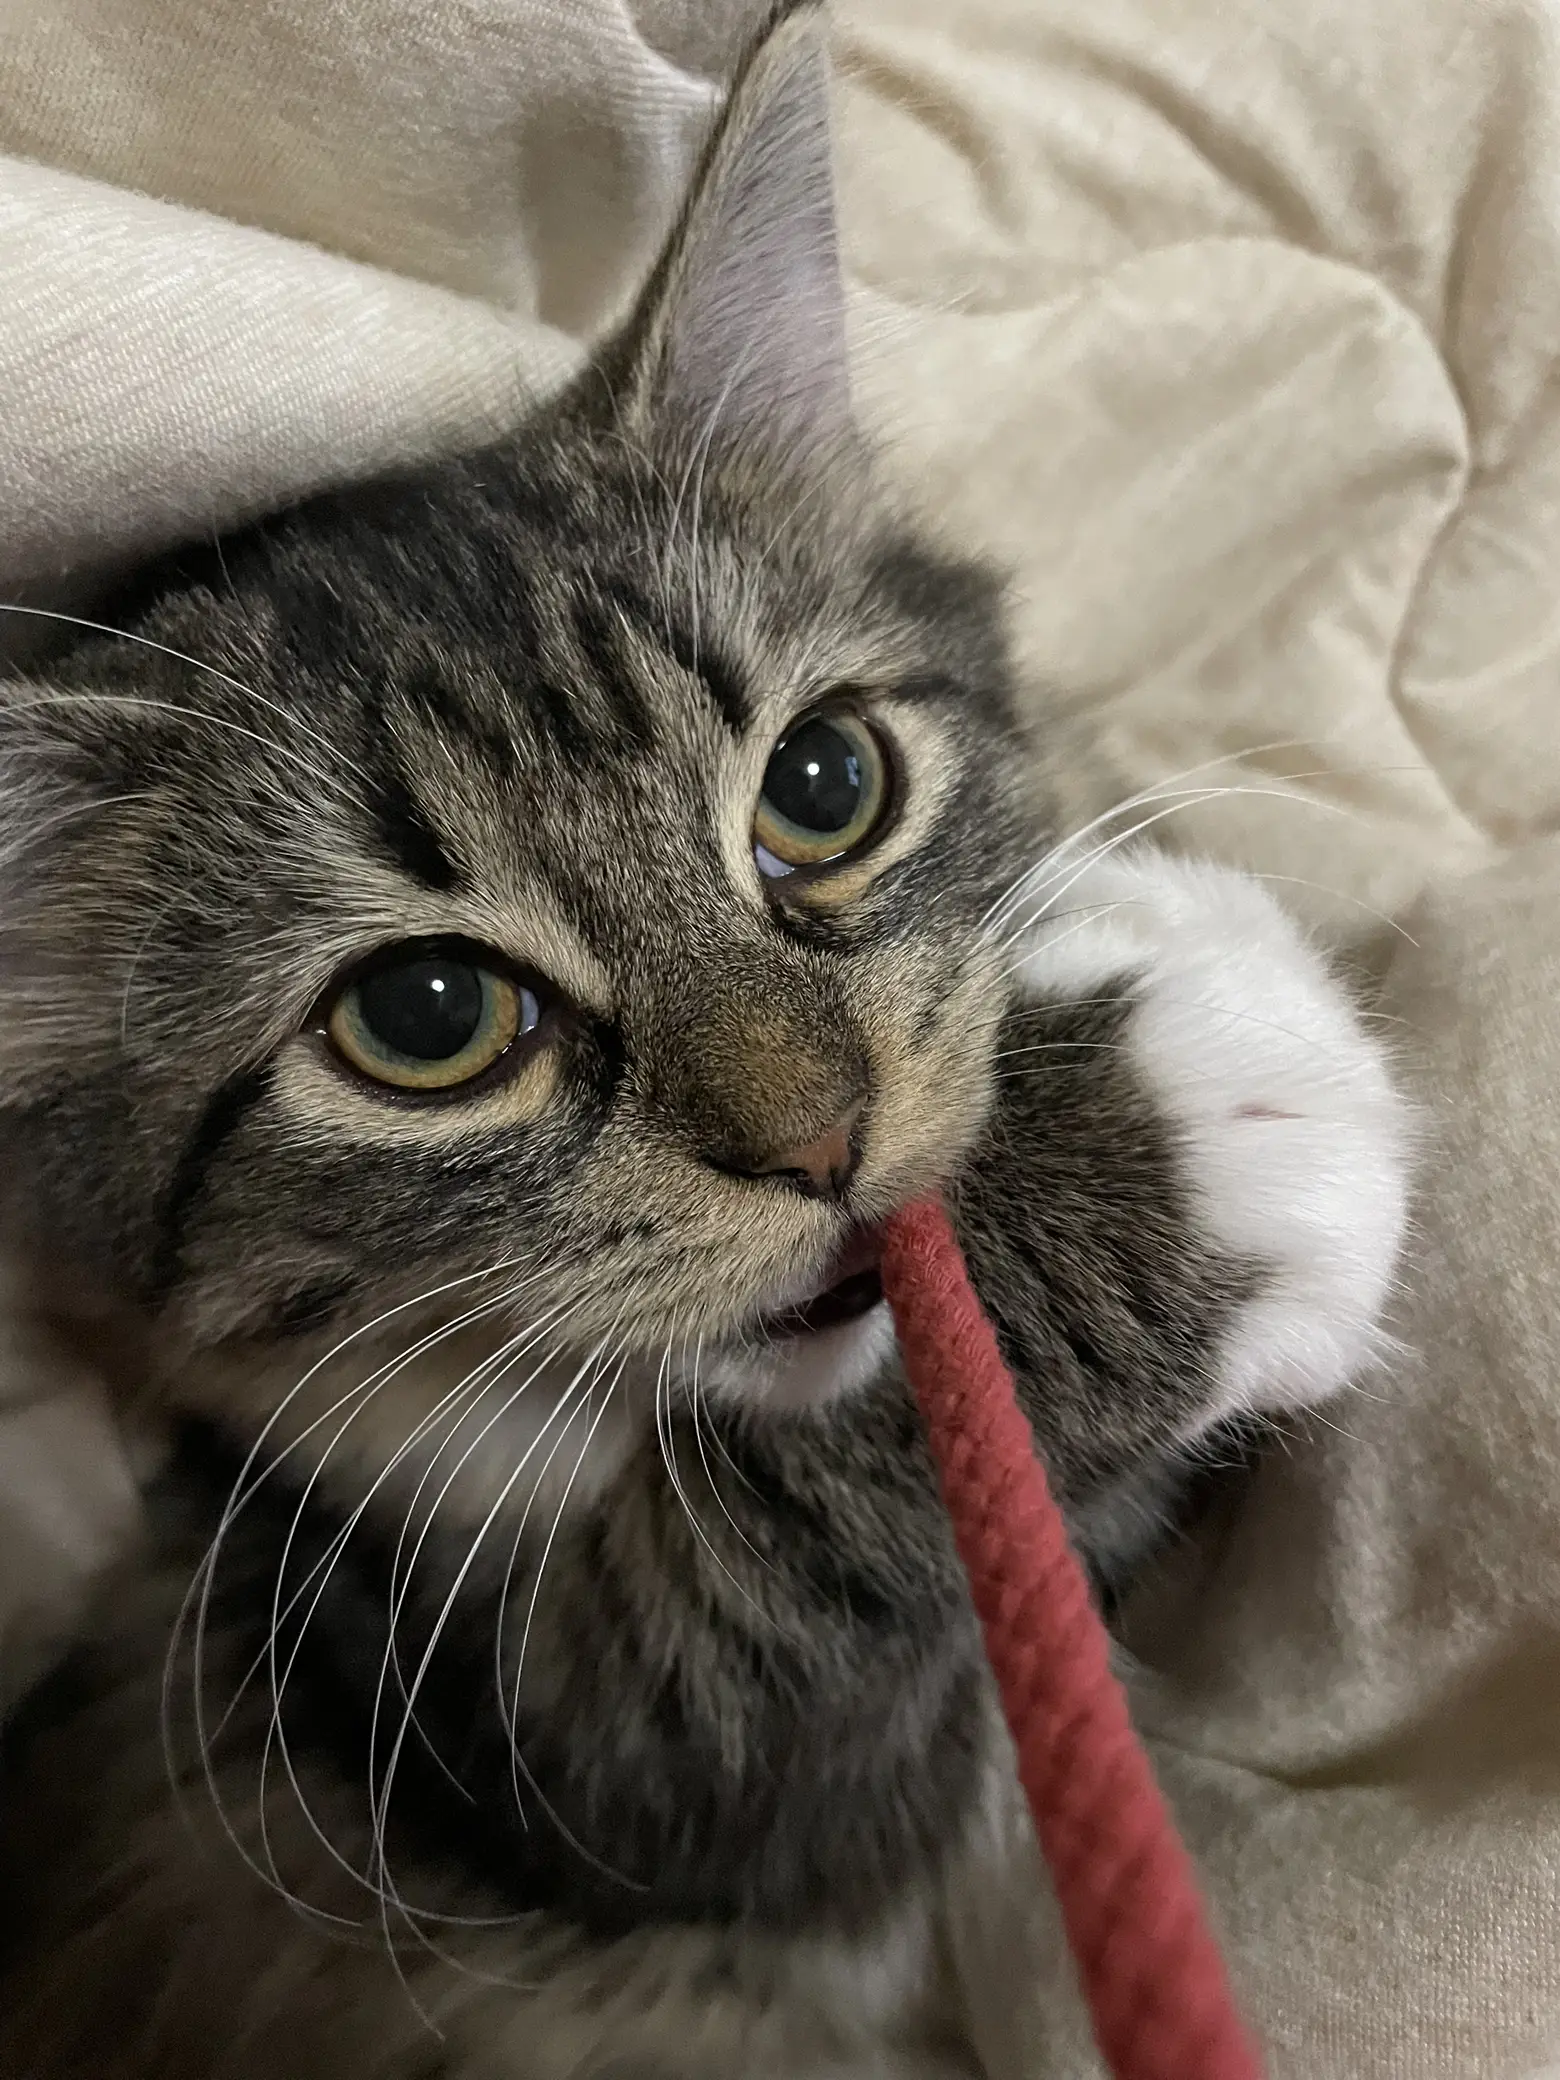 Play with hoodie string🐱 | Gallery posted by OHAGI&MONAKA | Lemon8